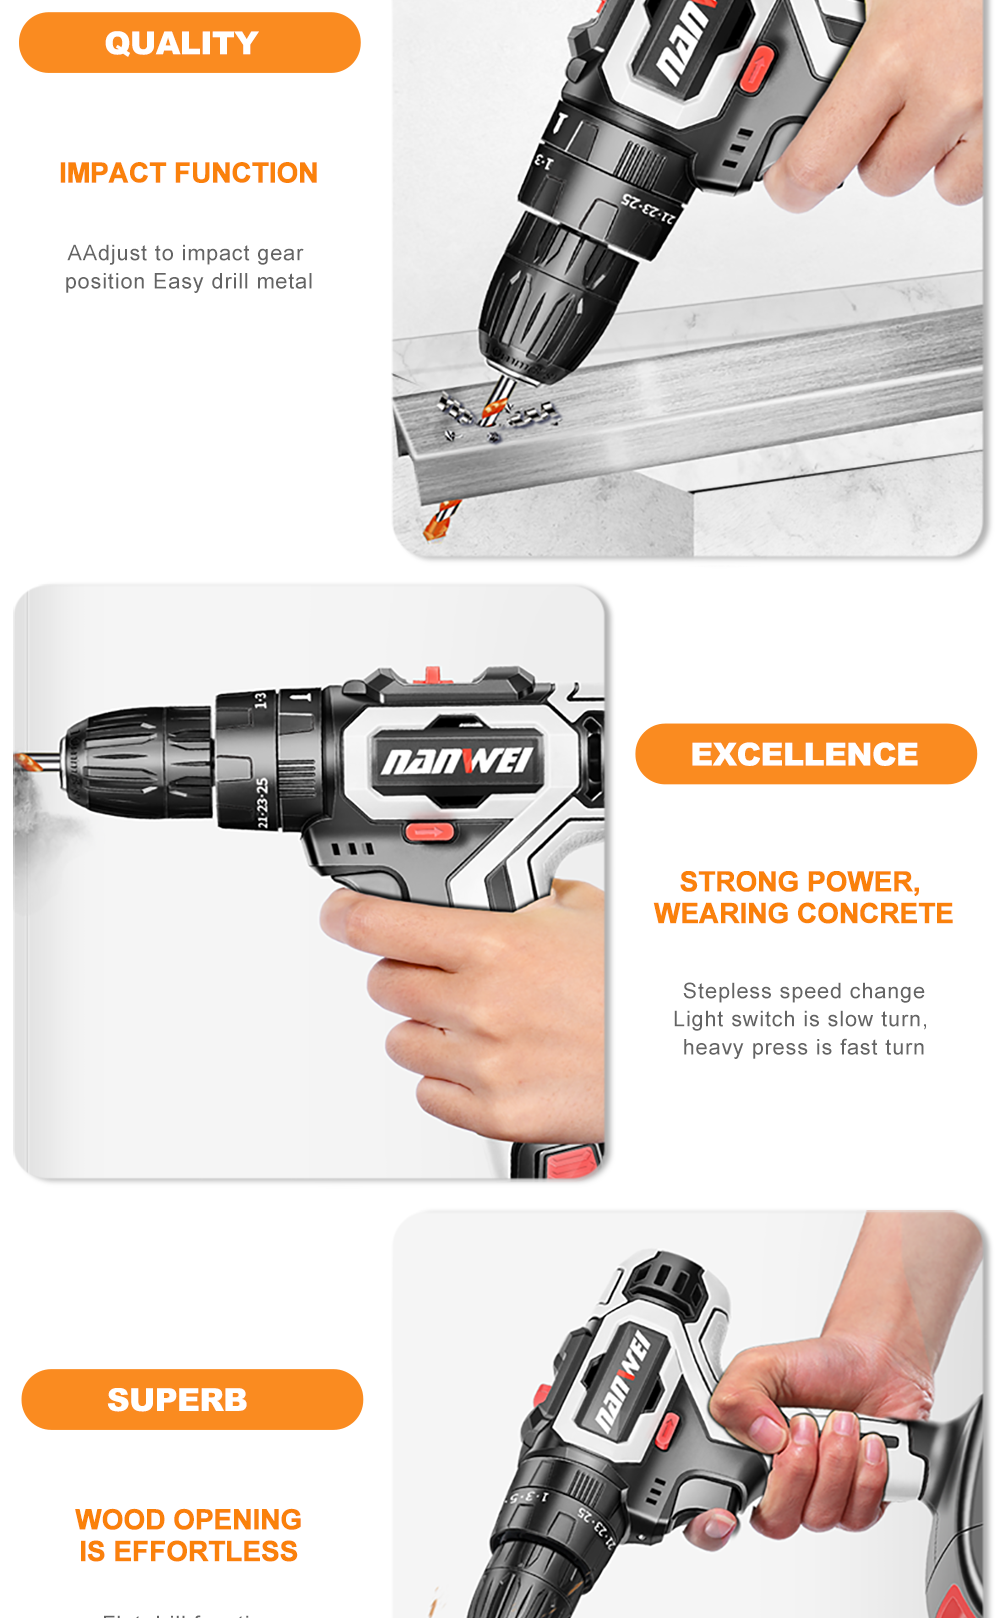 Nanwei-21V-Brushless-Impact-Power-Drill-35NM-Li-ion-Rechargeable-Electric-Flat-Drill-Screw-Driver-2--1695400